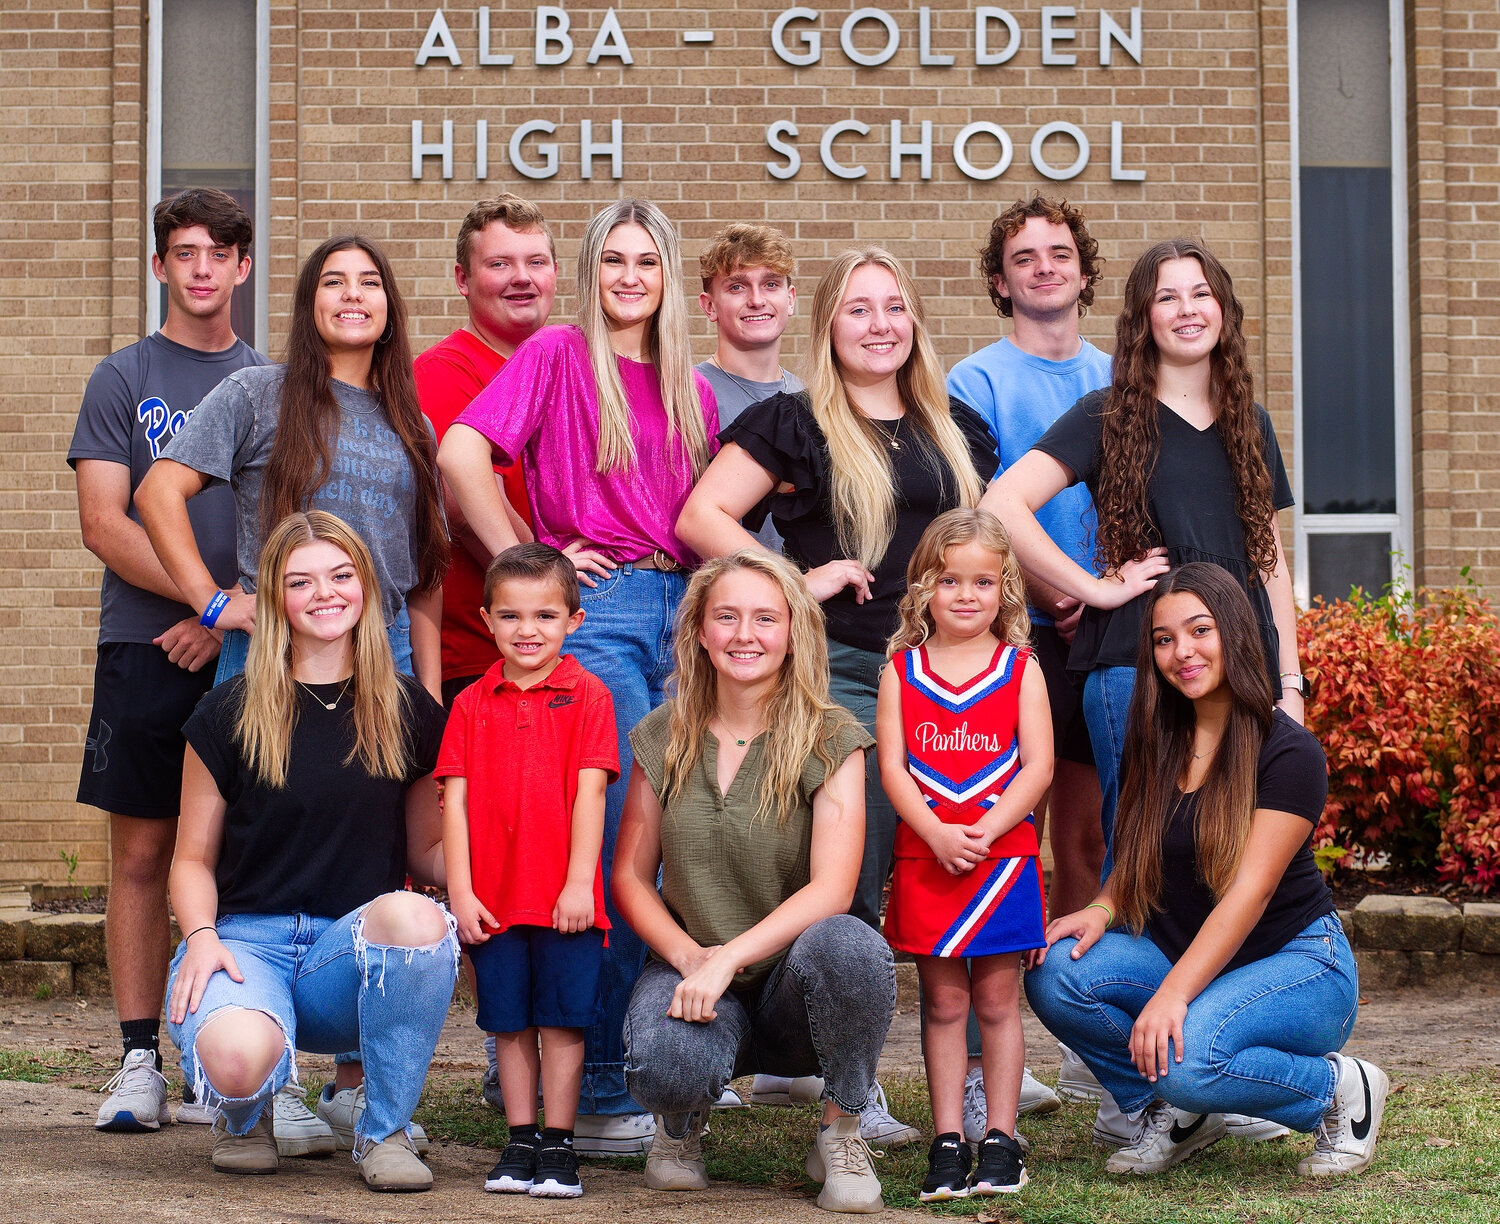 Members of the Alba-Golden homecoming court include, front from left, junior duchess Alexis Wilmut, ring-bearer River Quintana, freshman duchess Halley Peterson, flower girl Charlotte Hays and sophomore duchess Piper Hallman; middle, nominees for homecoming queen are seniors Erin Langston, Lexi France, Kirsty Jackson-Colegrove and Madelyn Osbern; back row, king nominees are seniors Easton Campbell, Seth Converse, Gavin Parker and Jett Kruse.